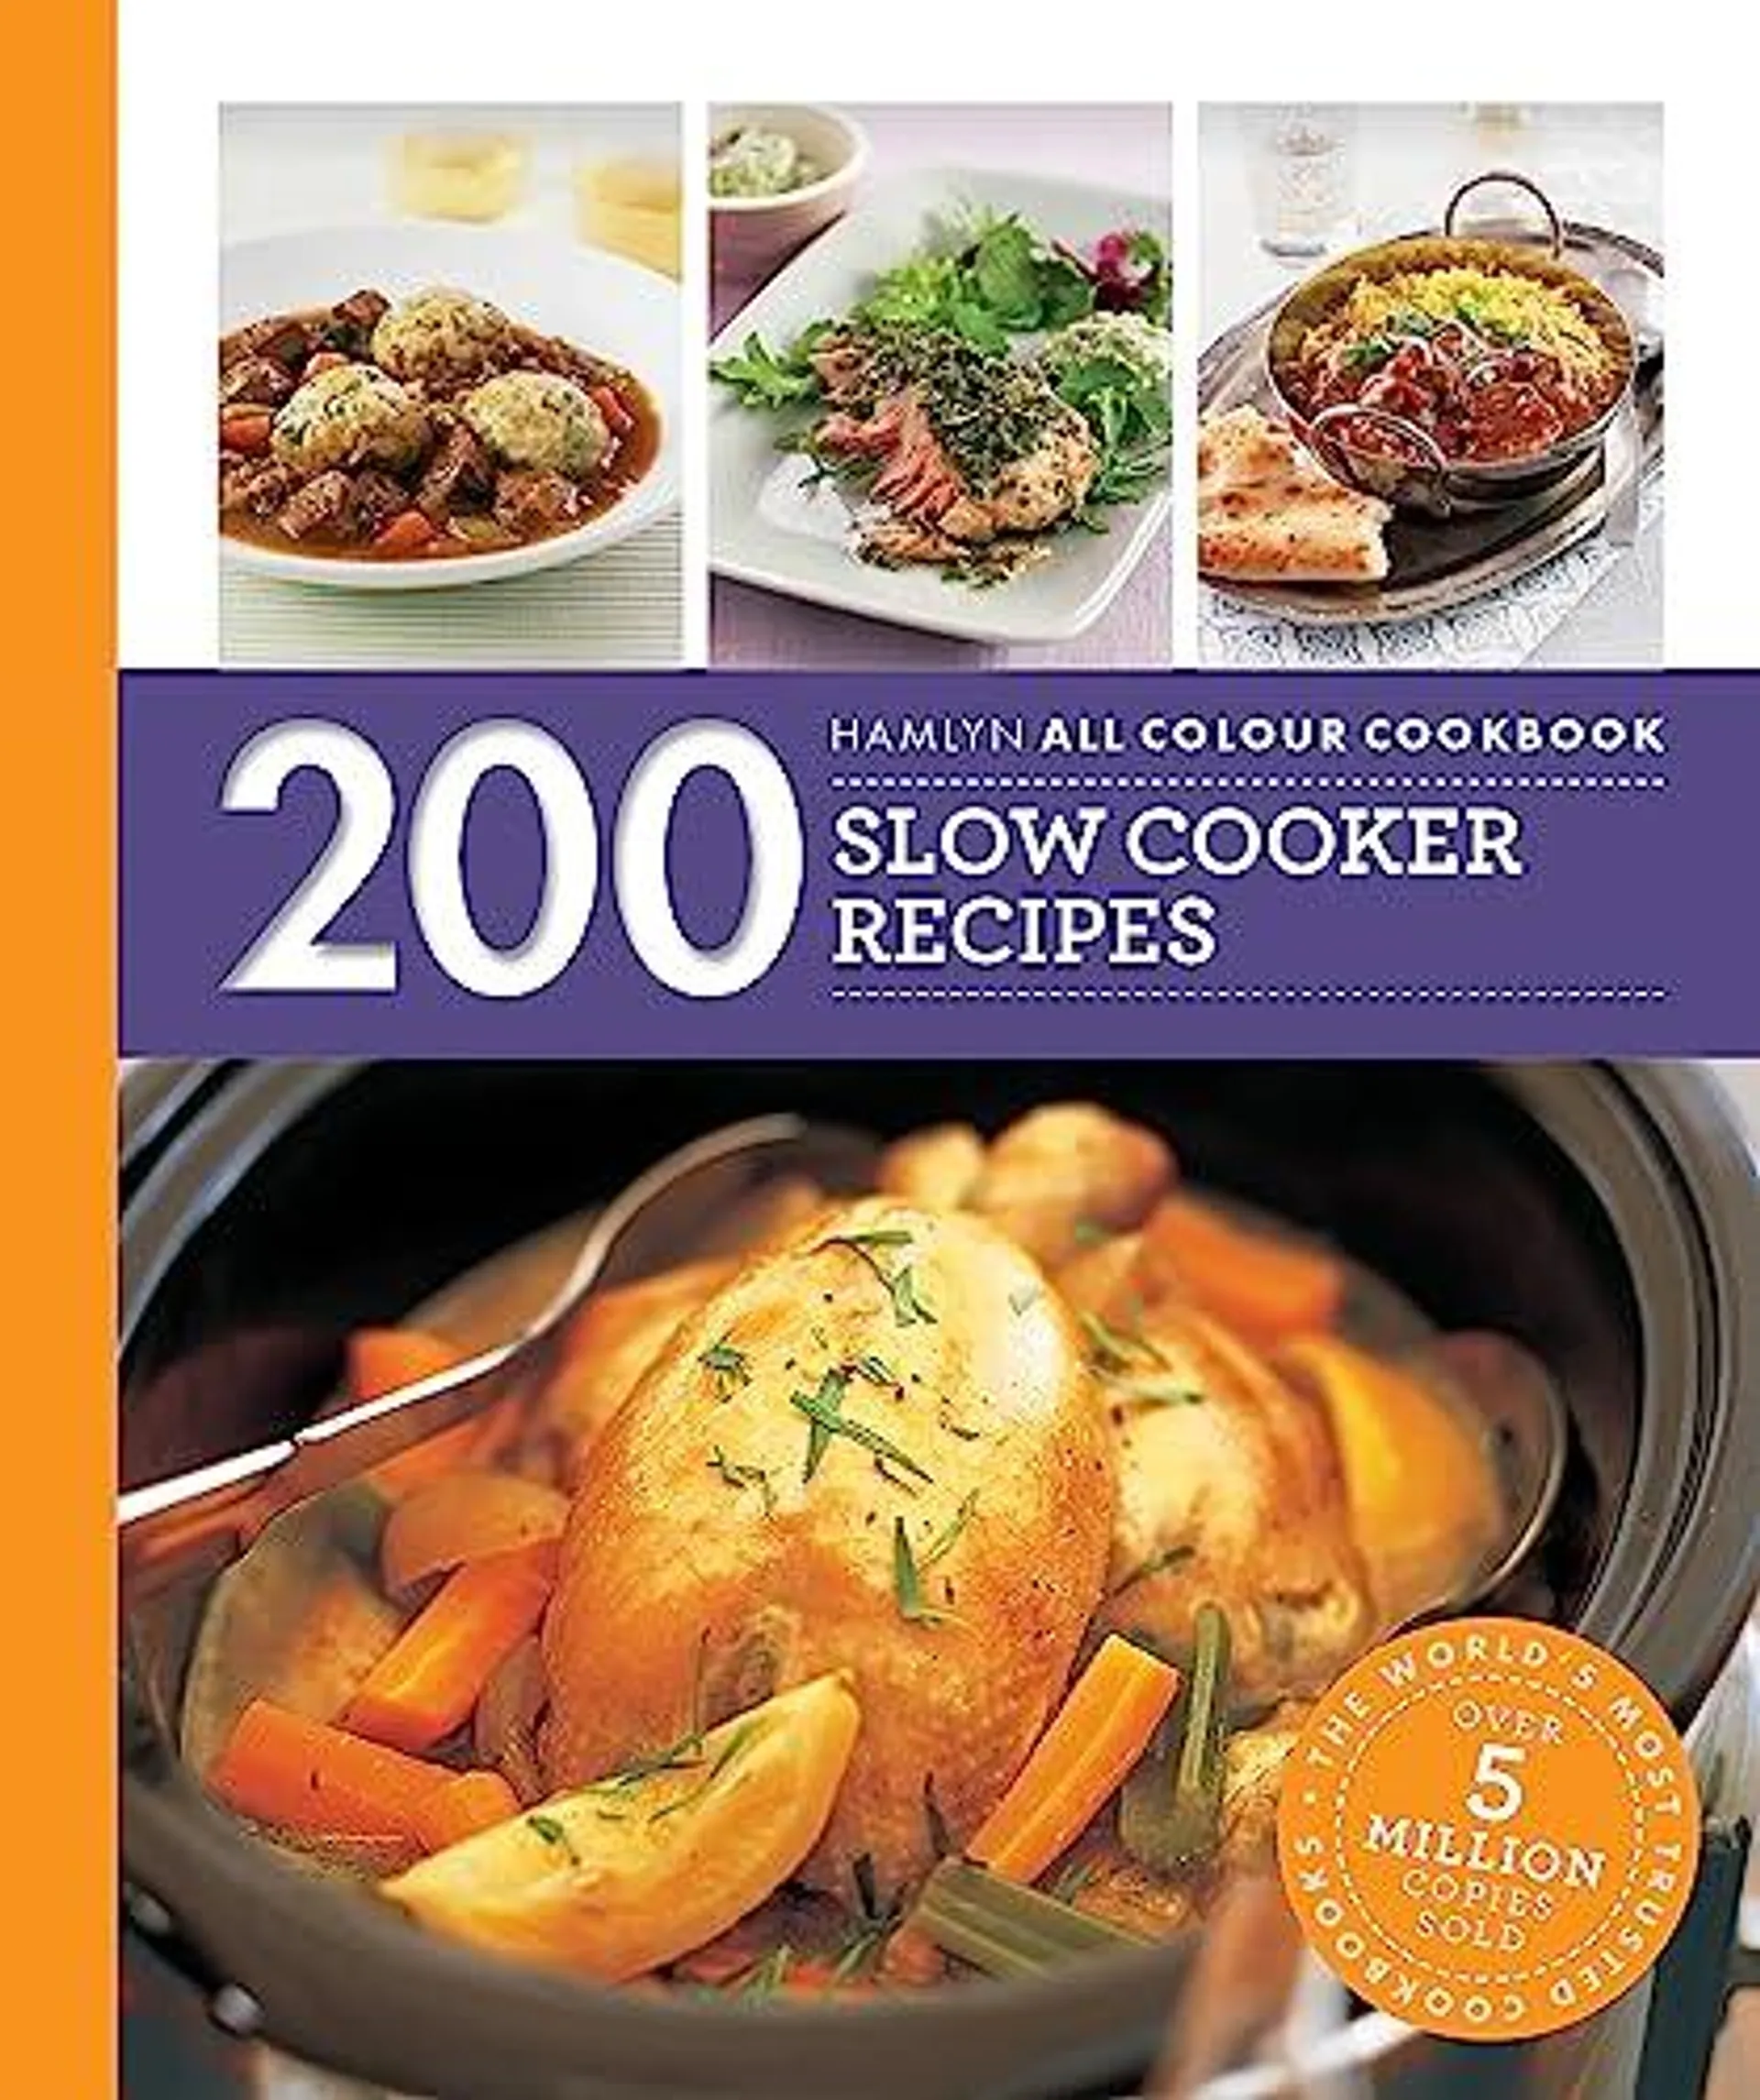 Hamlyn All Colour Cookery: 200 Slow Cooker Recipes by Sara Lewis